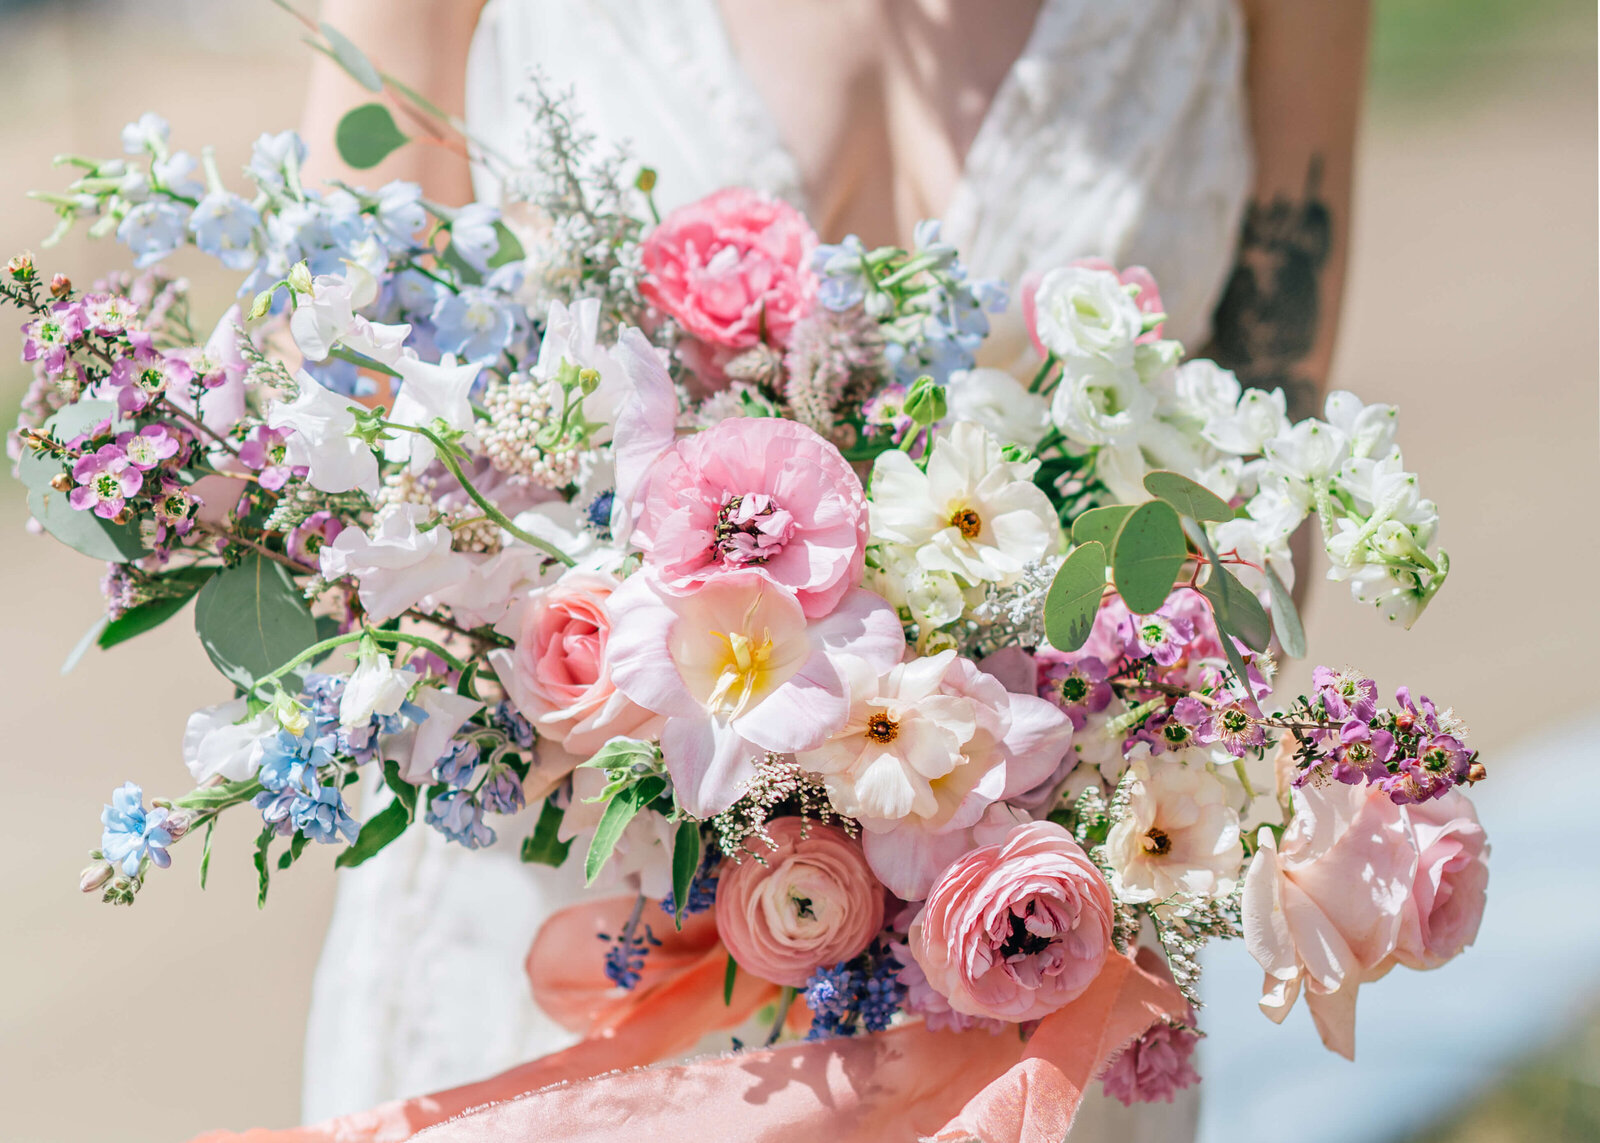 Virginia wedding photographer captures an image of a vibrant and pink floral bouquet